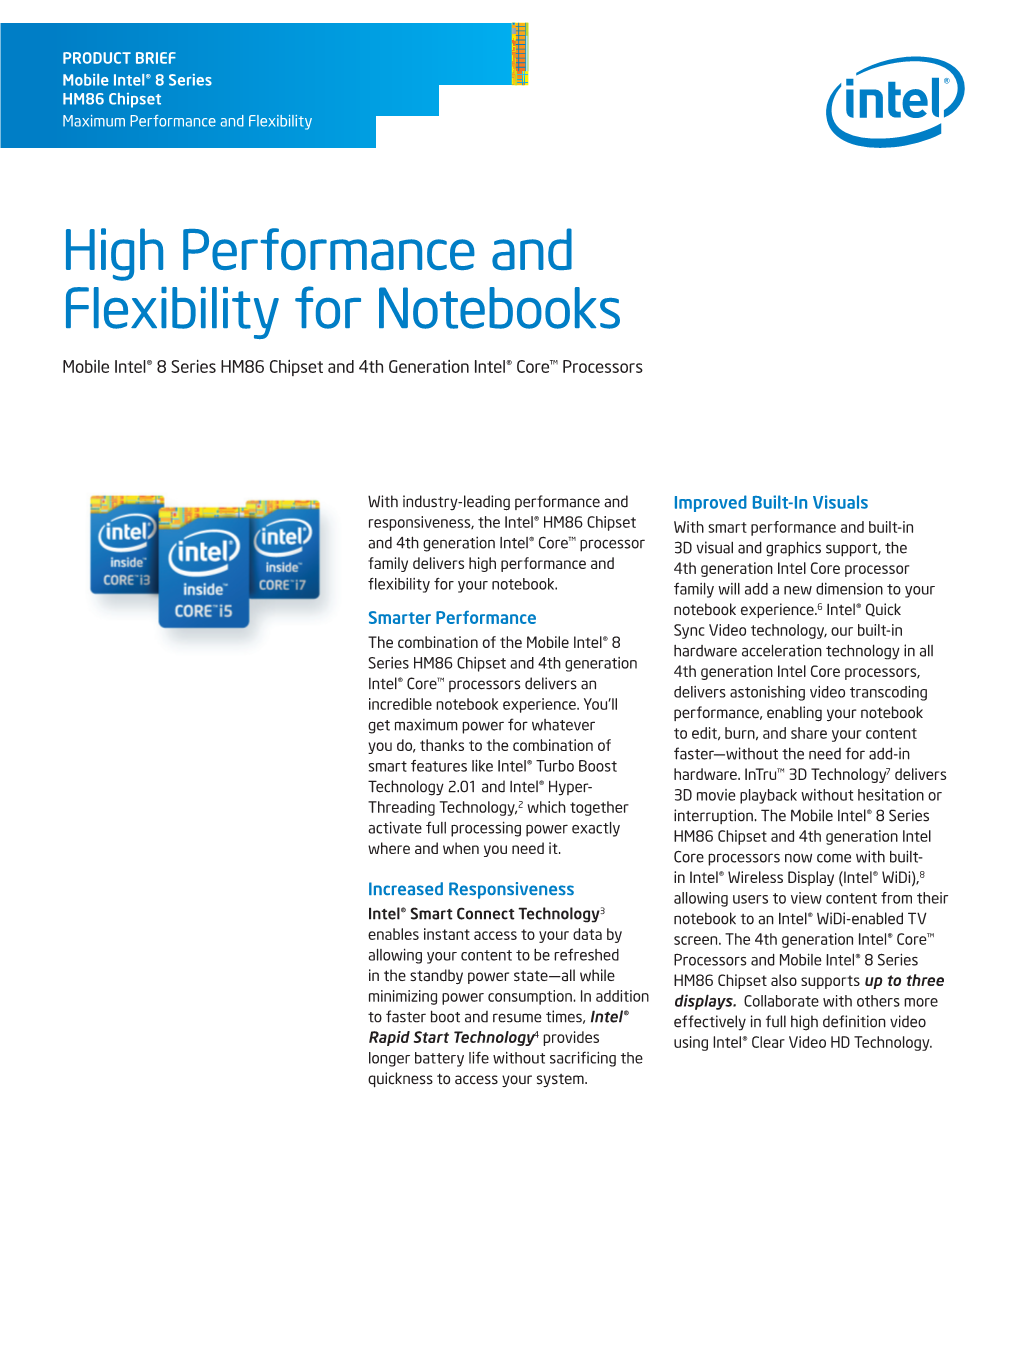 High Performance and Flexibility for Notebooks